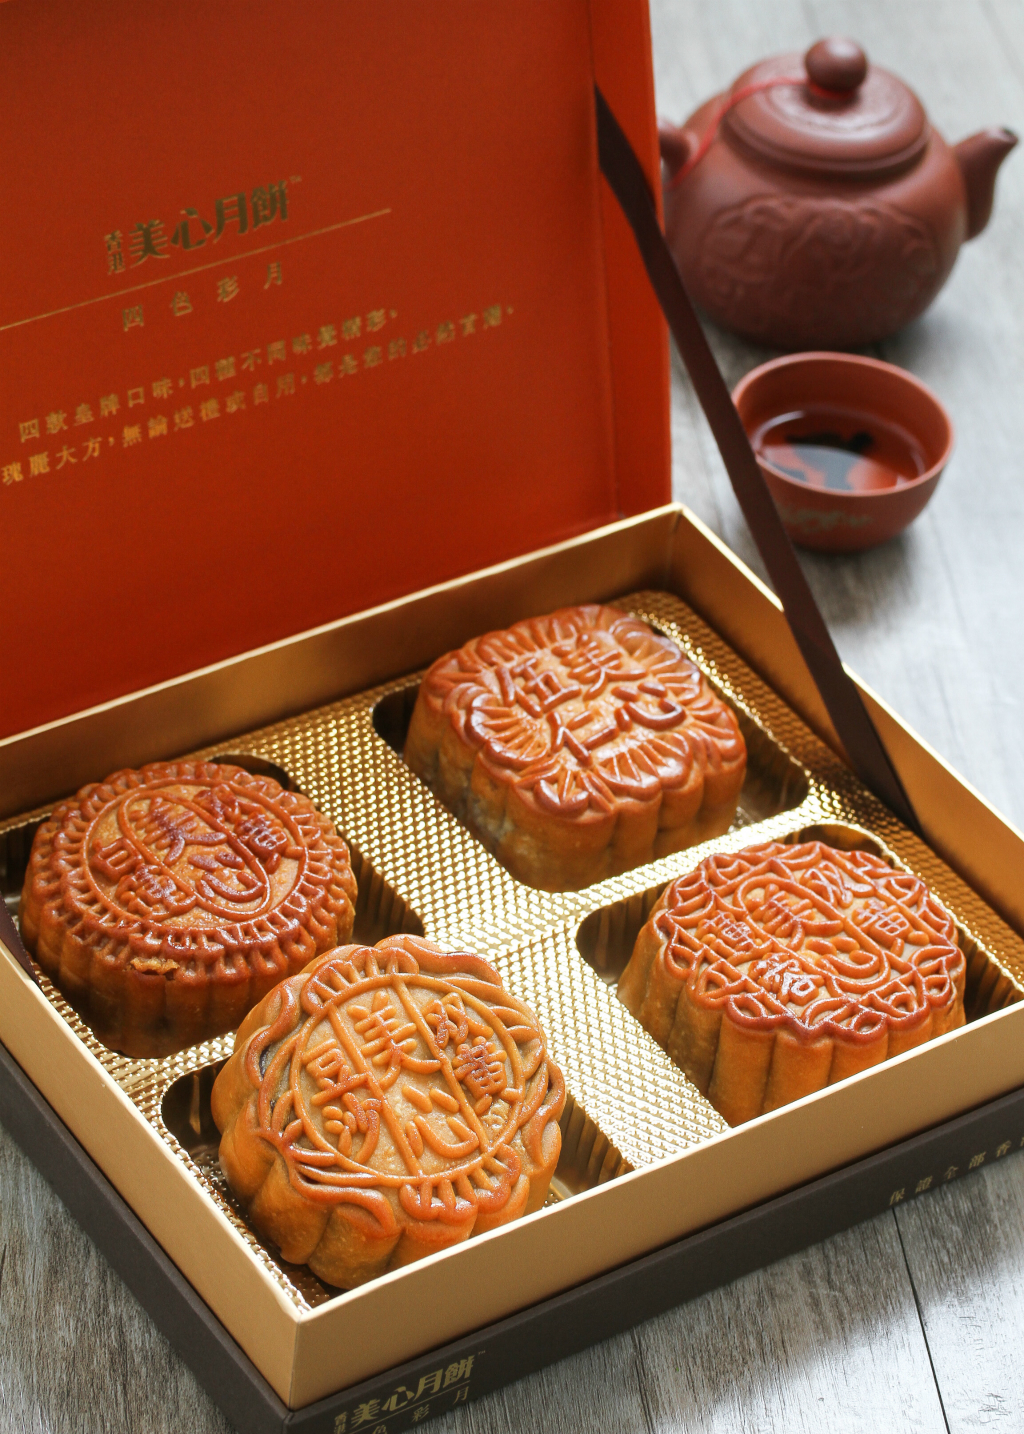 Hong Kong Maxim Mooncakes in Singapore – Savour the Taste of the